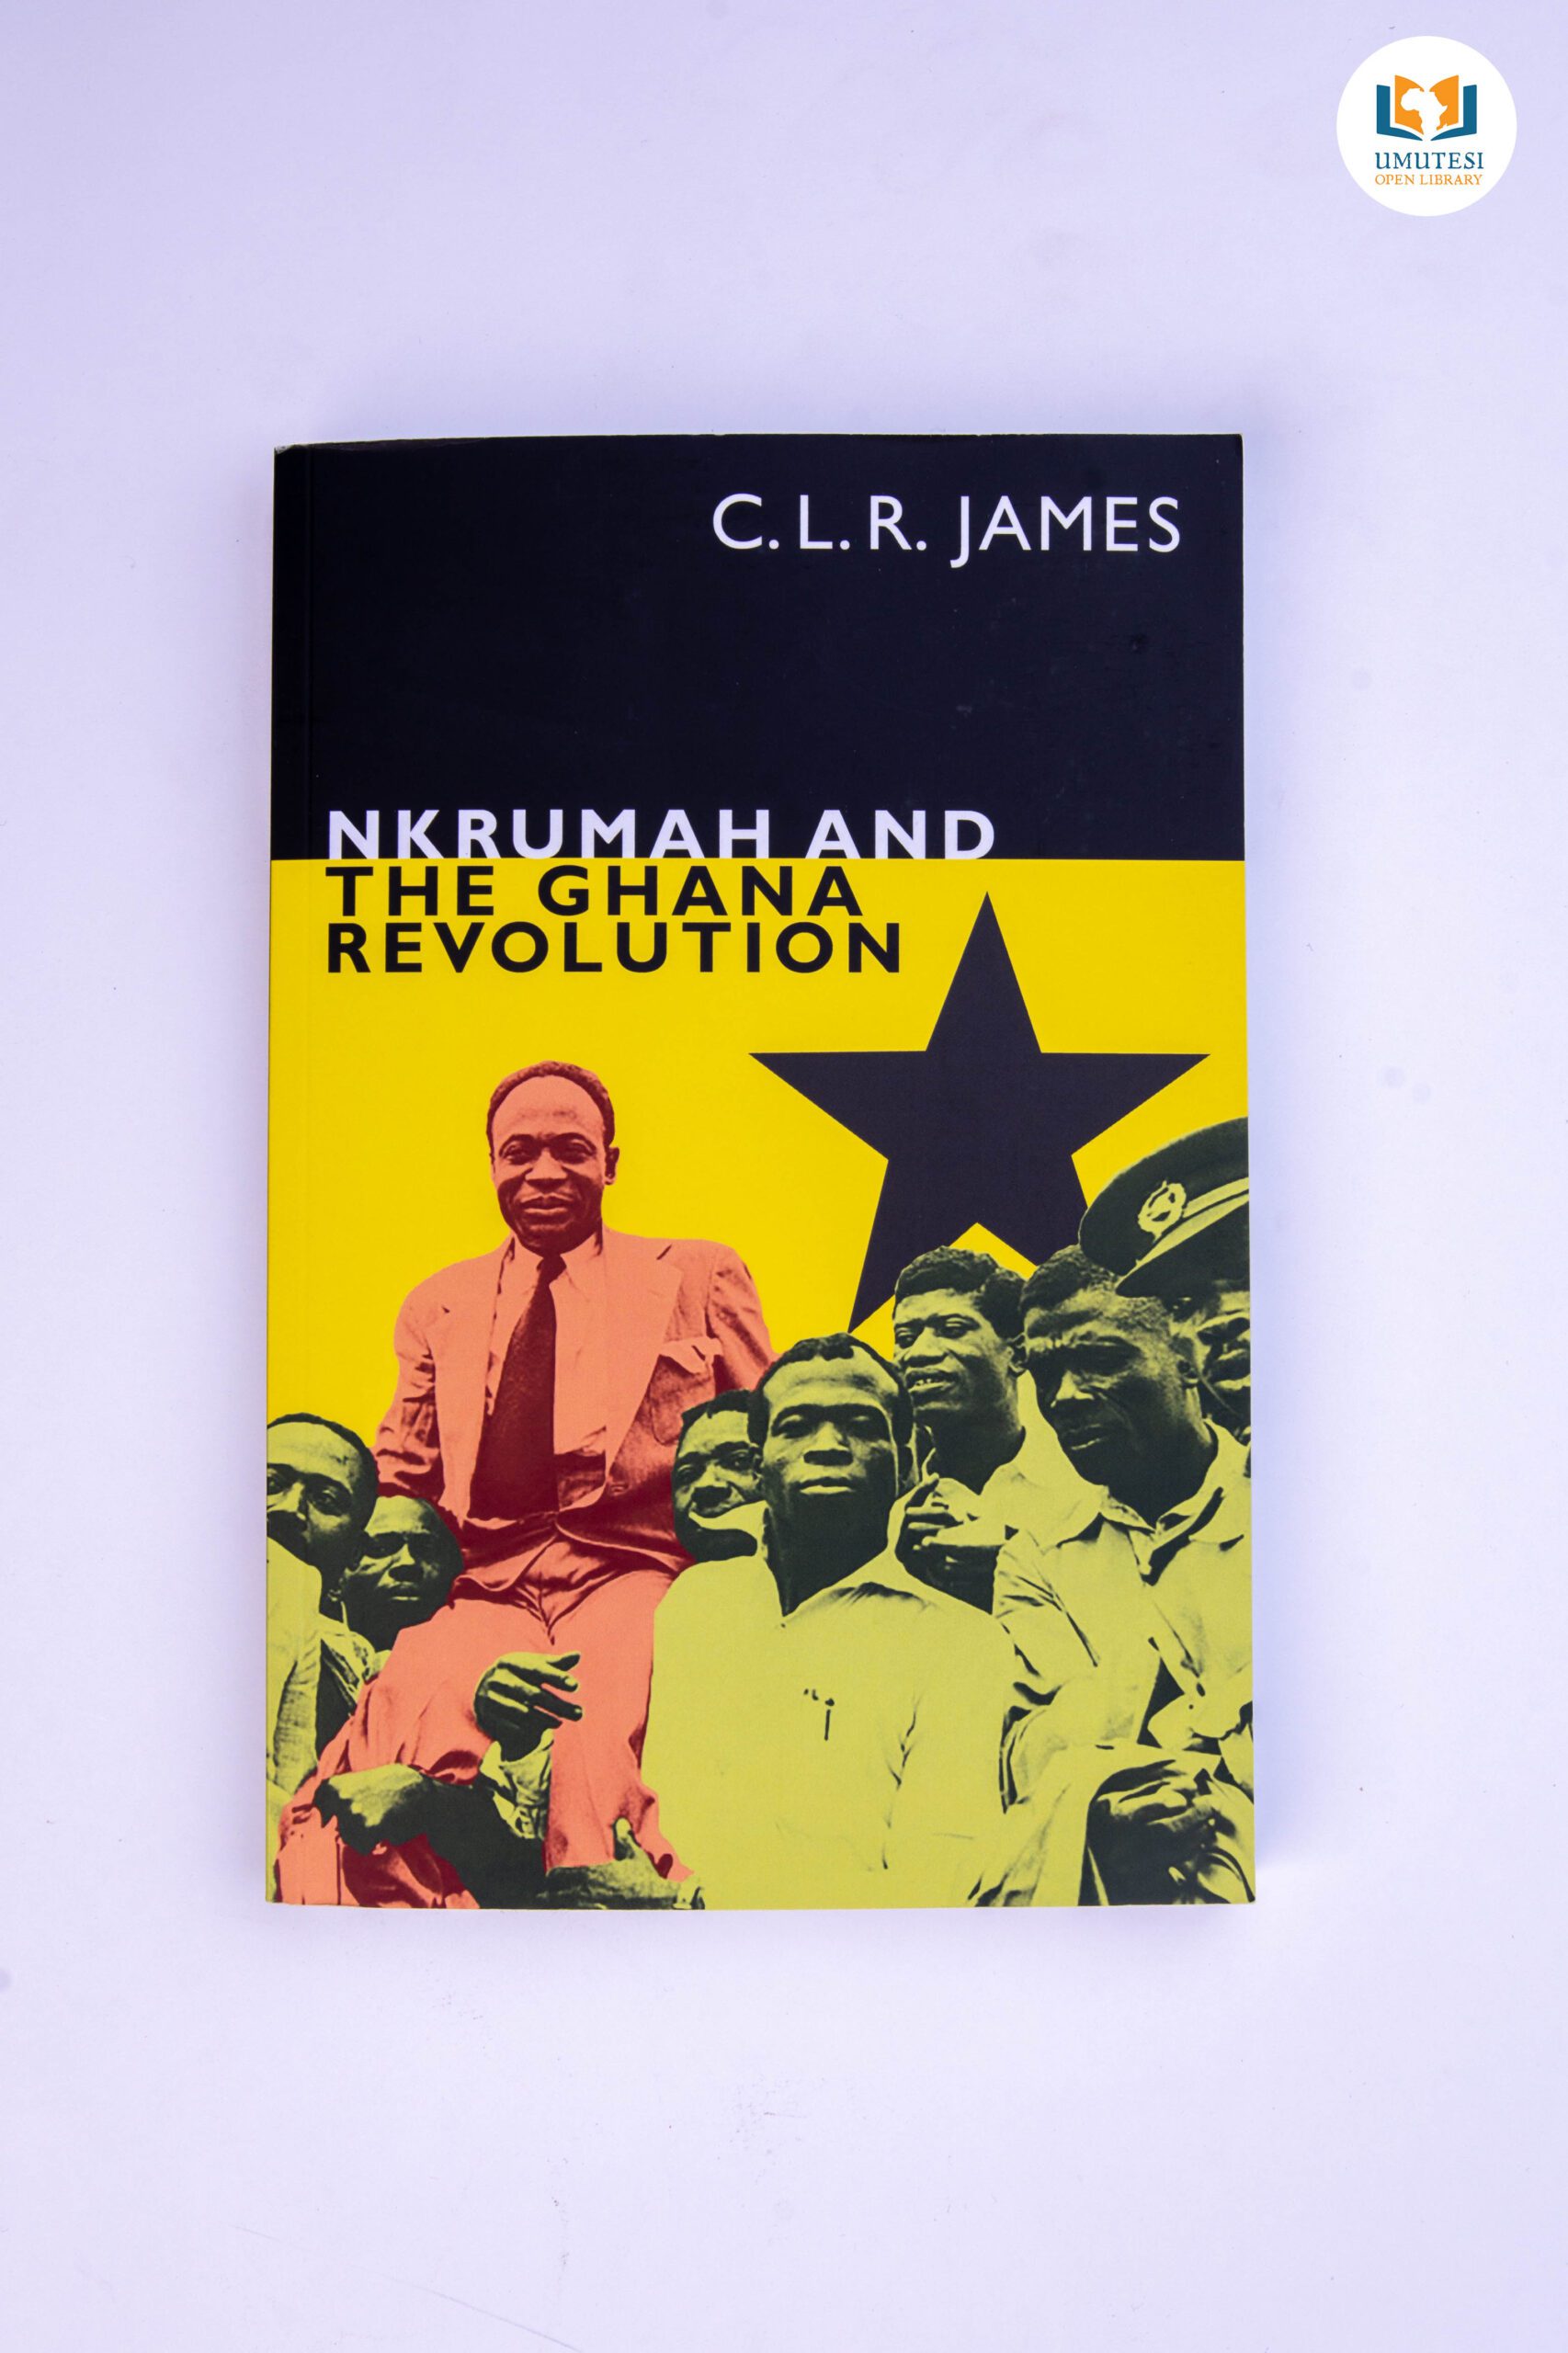 Nkrumah and the Ghana Revolution by C. L. R. James